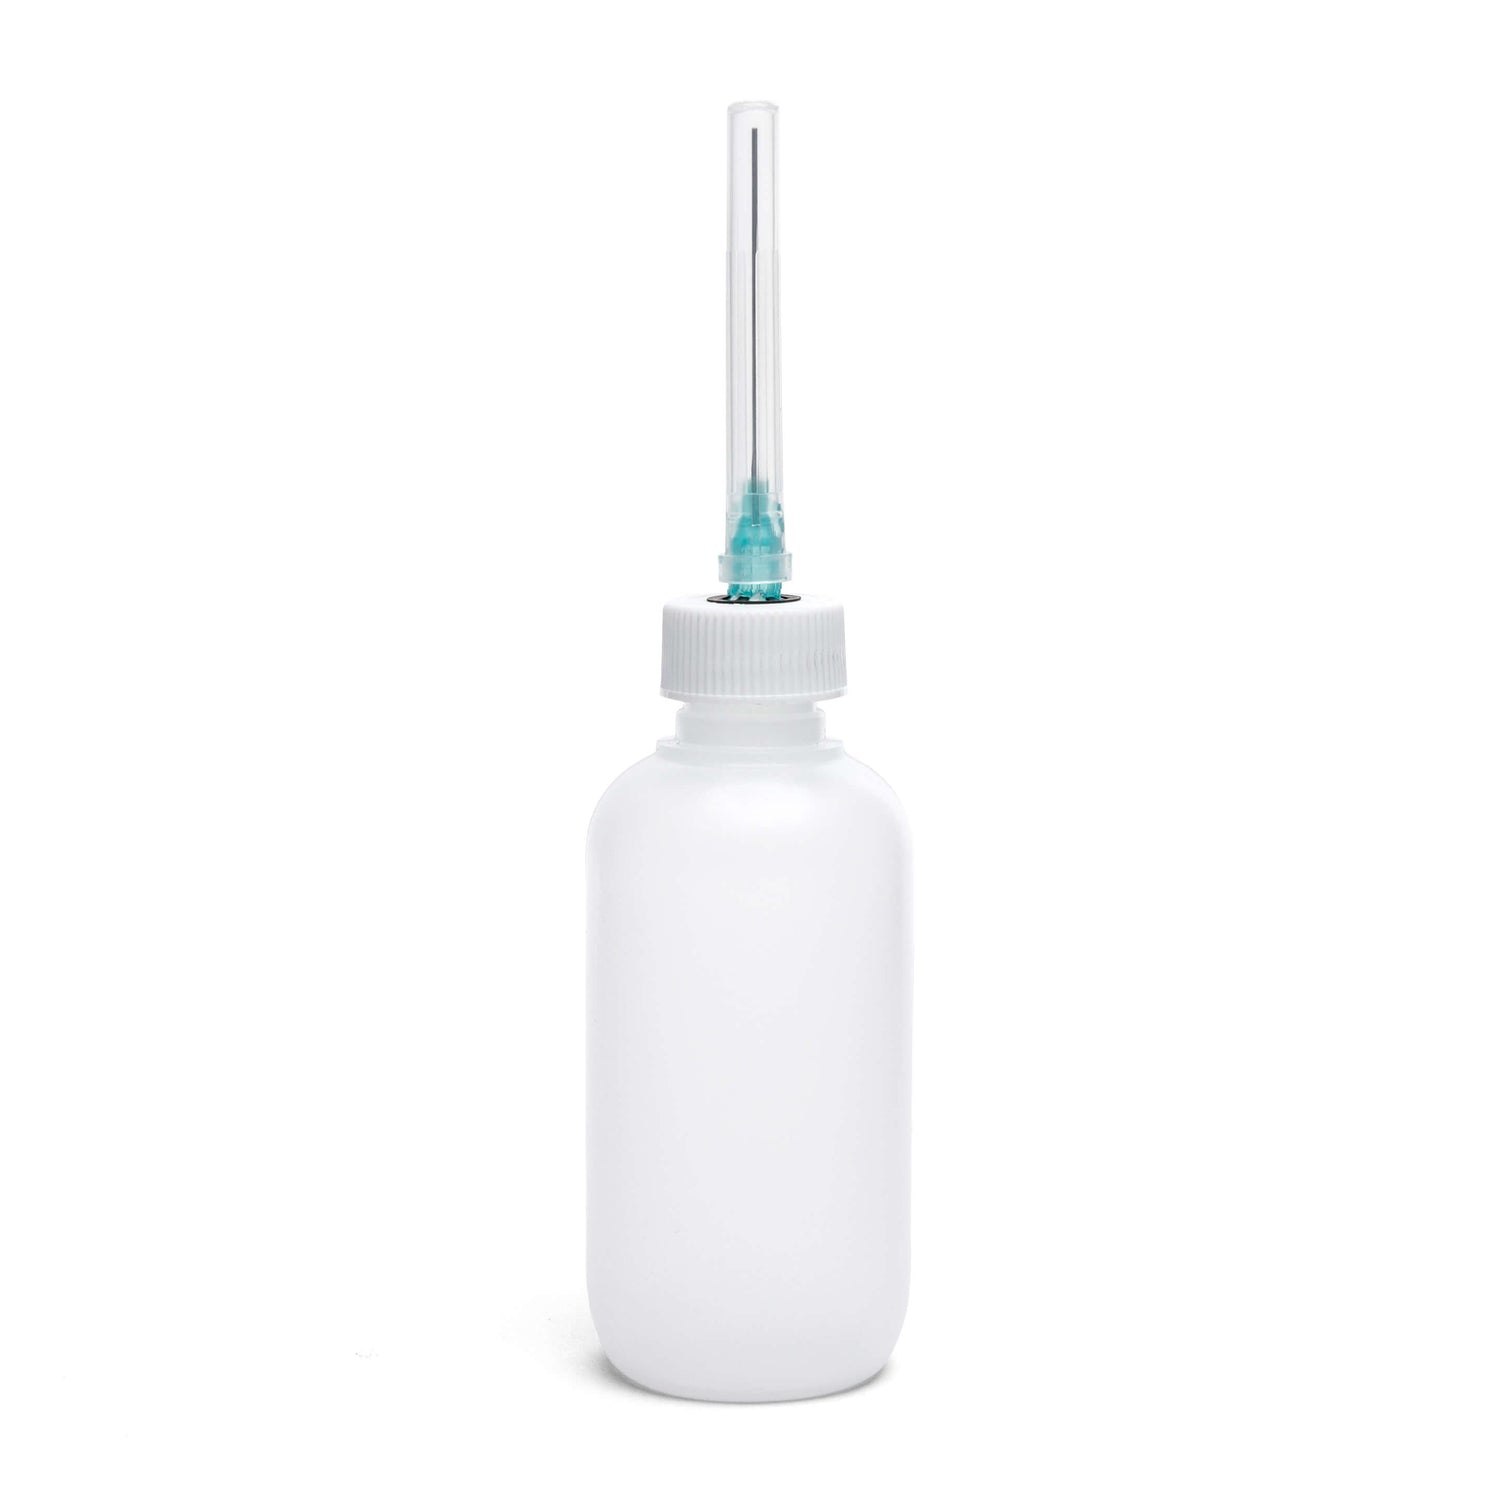 Applicator Cap/Needle Assembled with Round Bottles